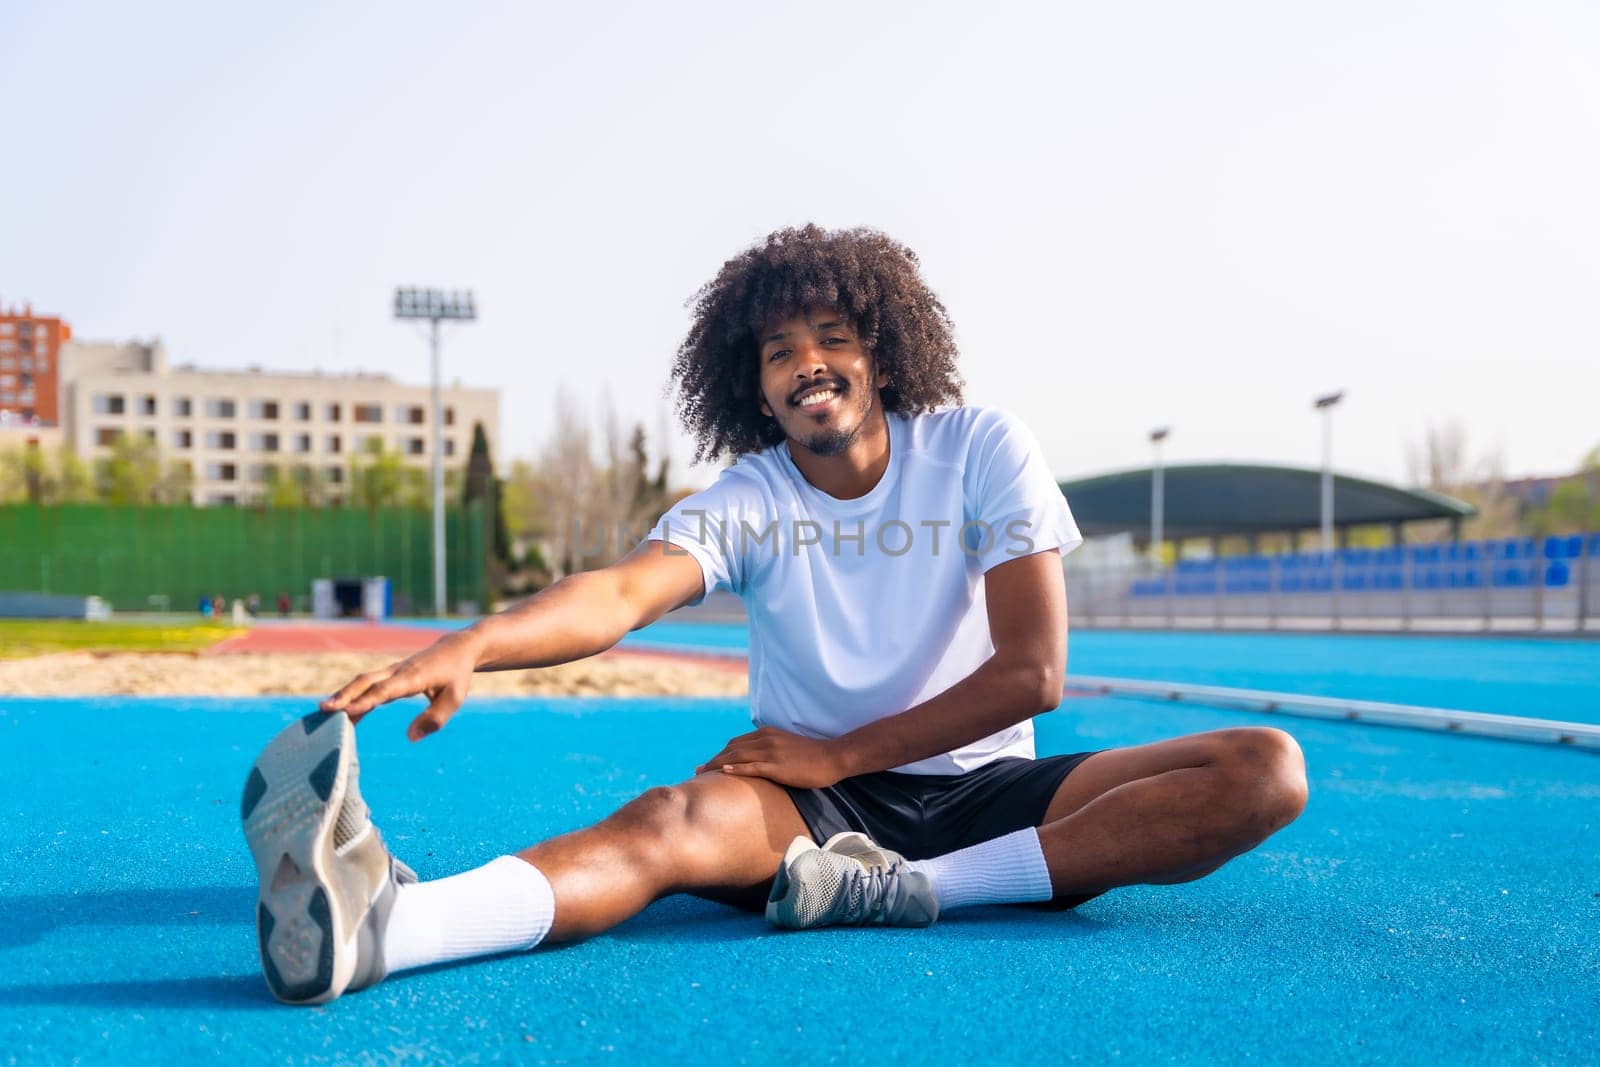 African man stretching in an outdoor running track by Huizi